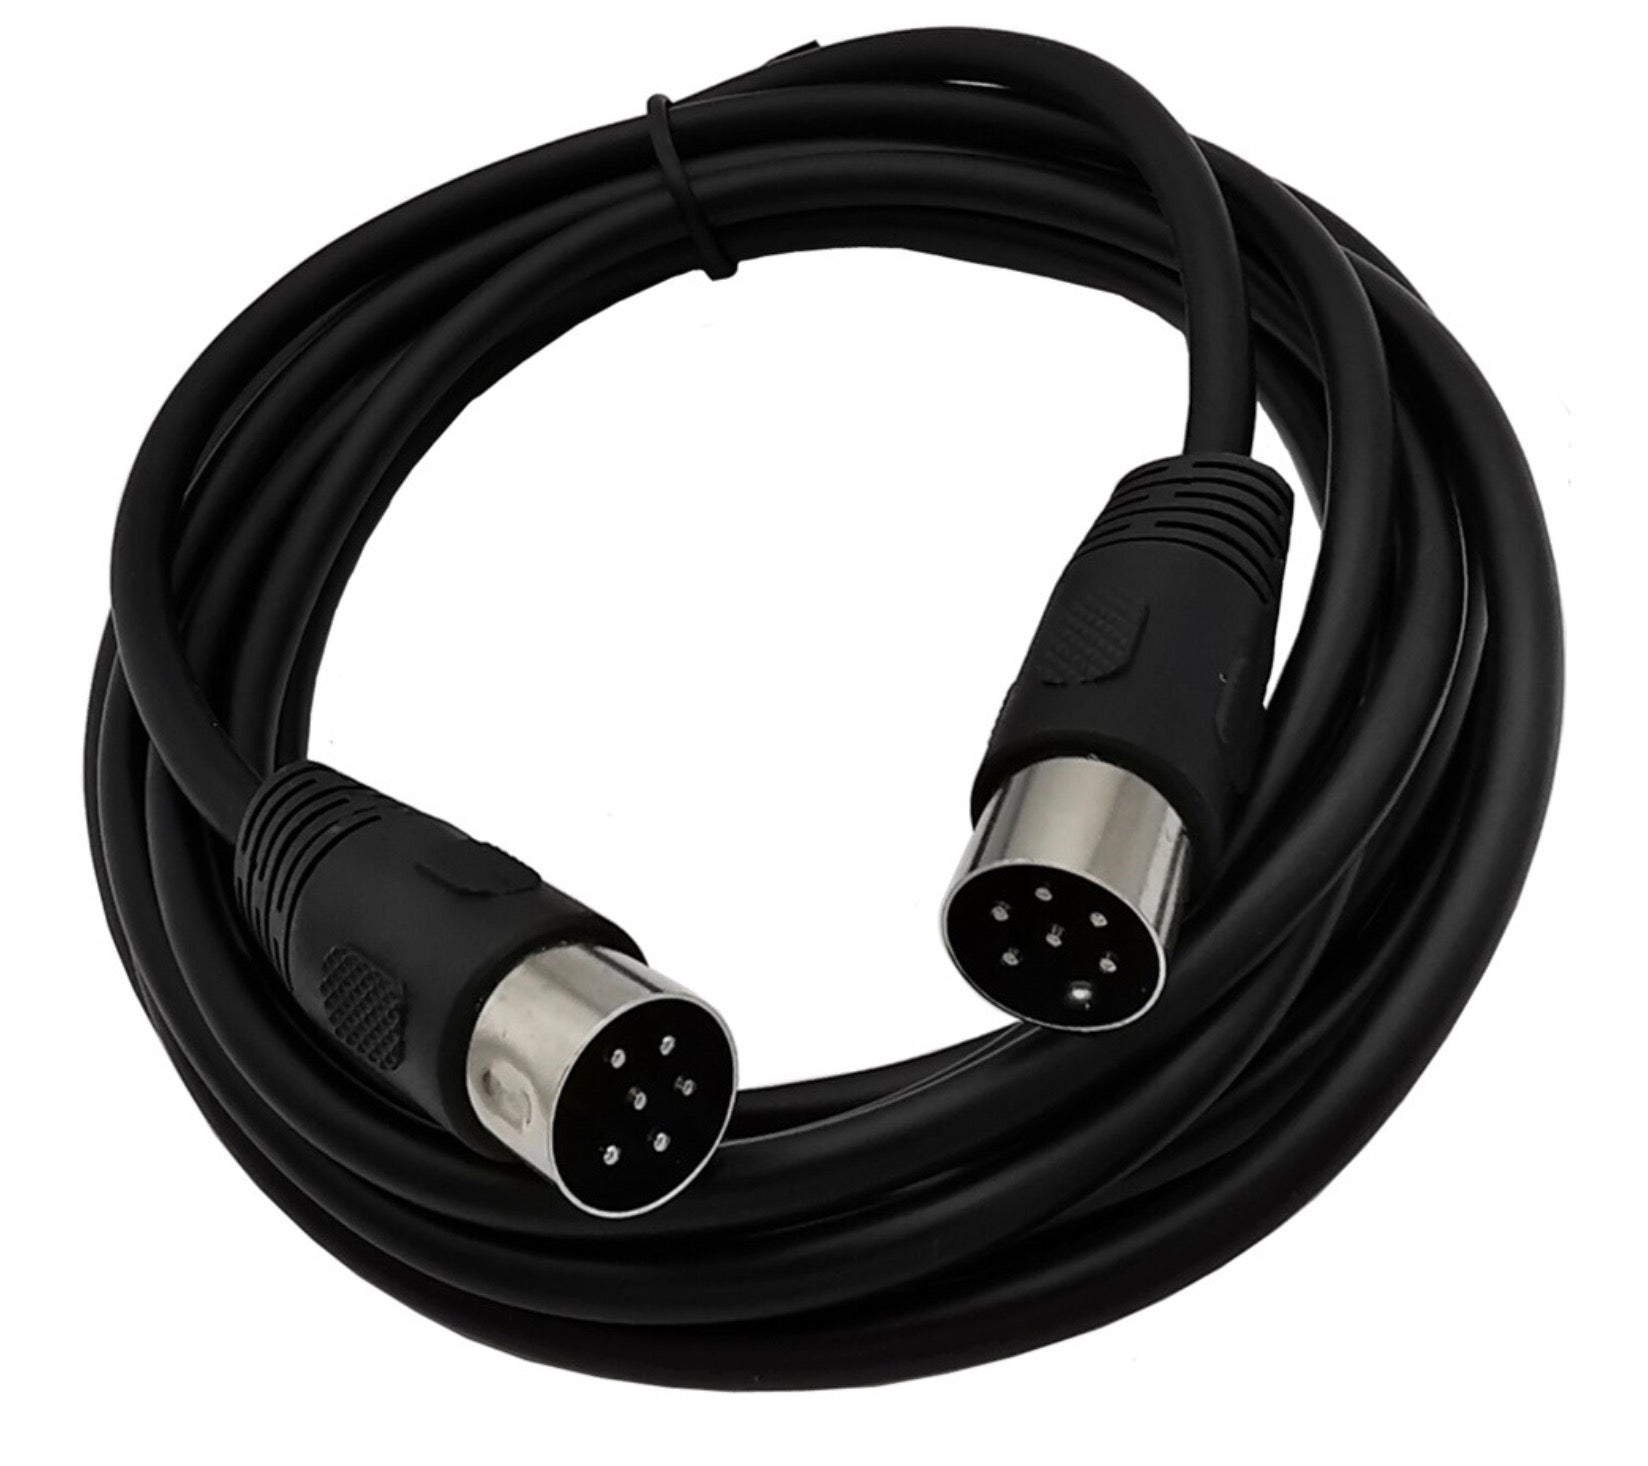 6-Pin Din Male to Male Audio Cable for Digital Audio Devices